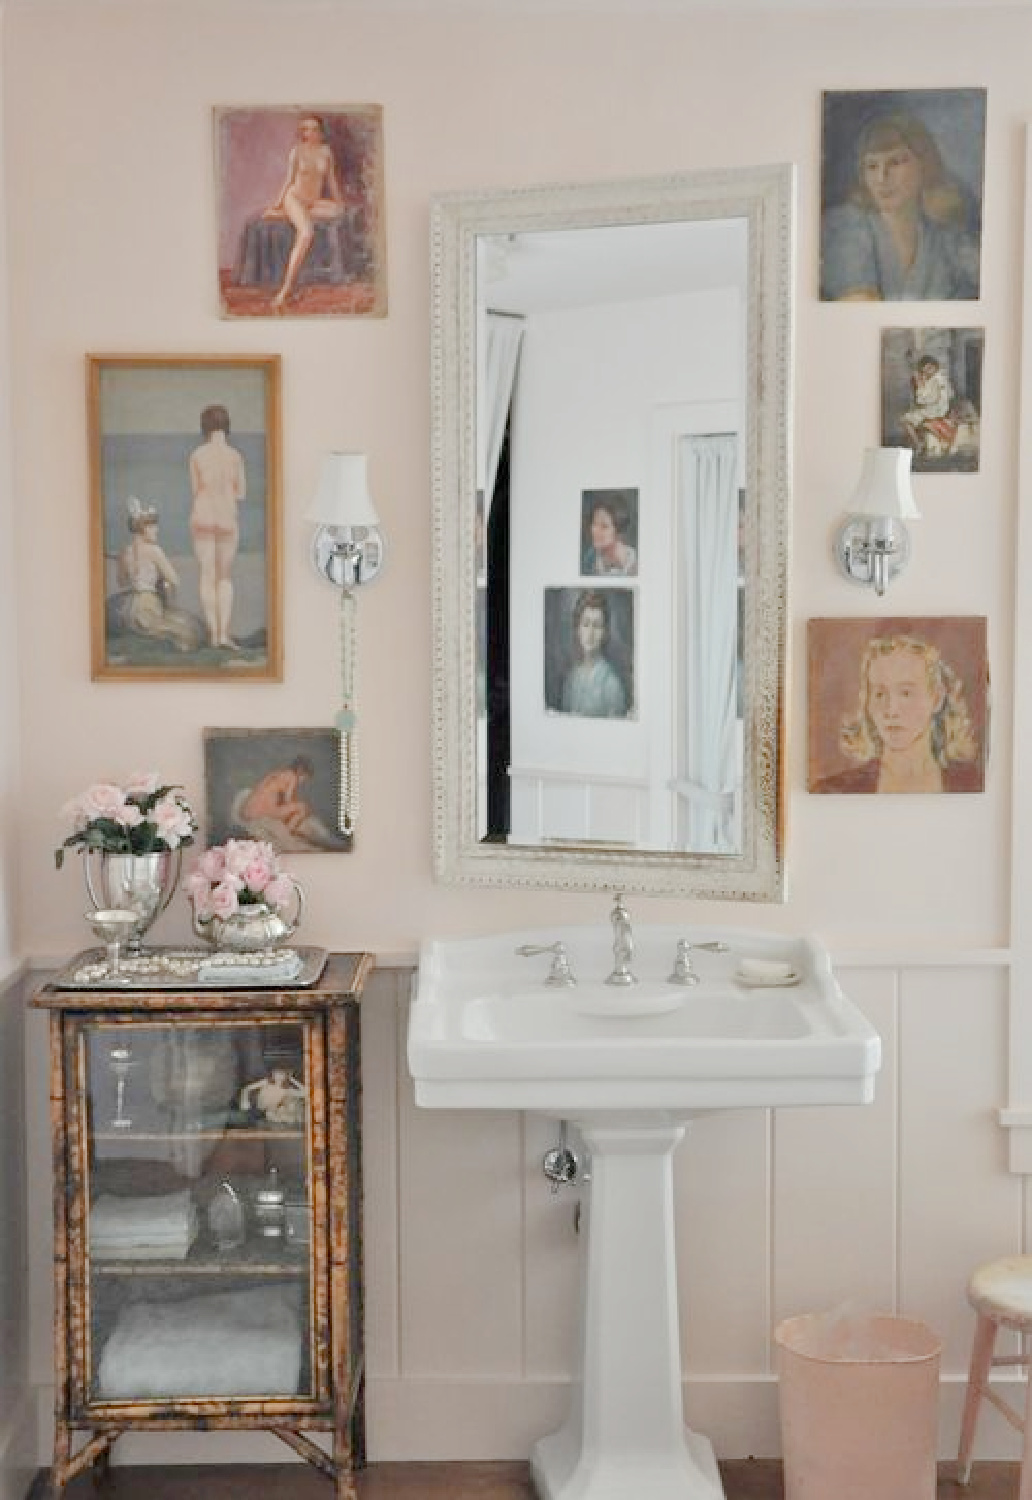 Velvet and Linen's pink bathroom with Farrow & Ball Pink Ground paint color, vintage portrait gallery and pedestal sink. Come see the Best Sophisticated, Chic and Subtle Pink Paint Colors on Hello Lovely Studio!